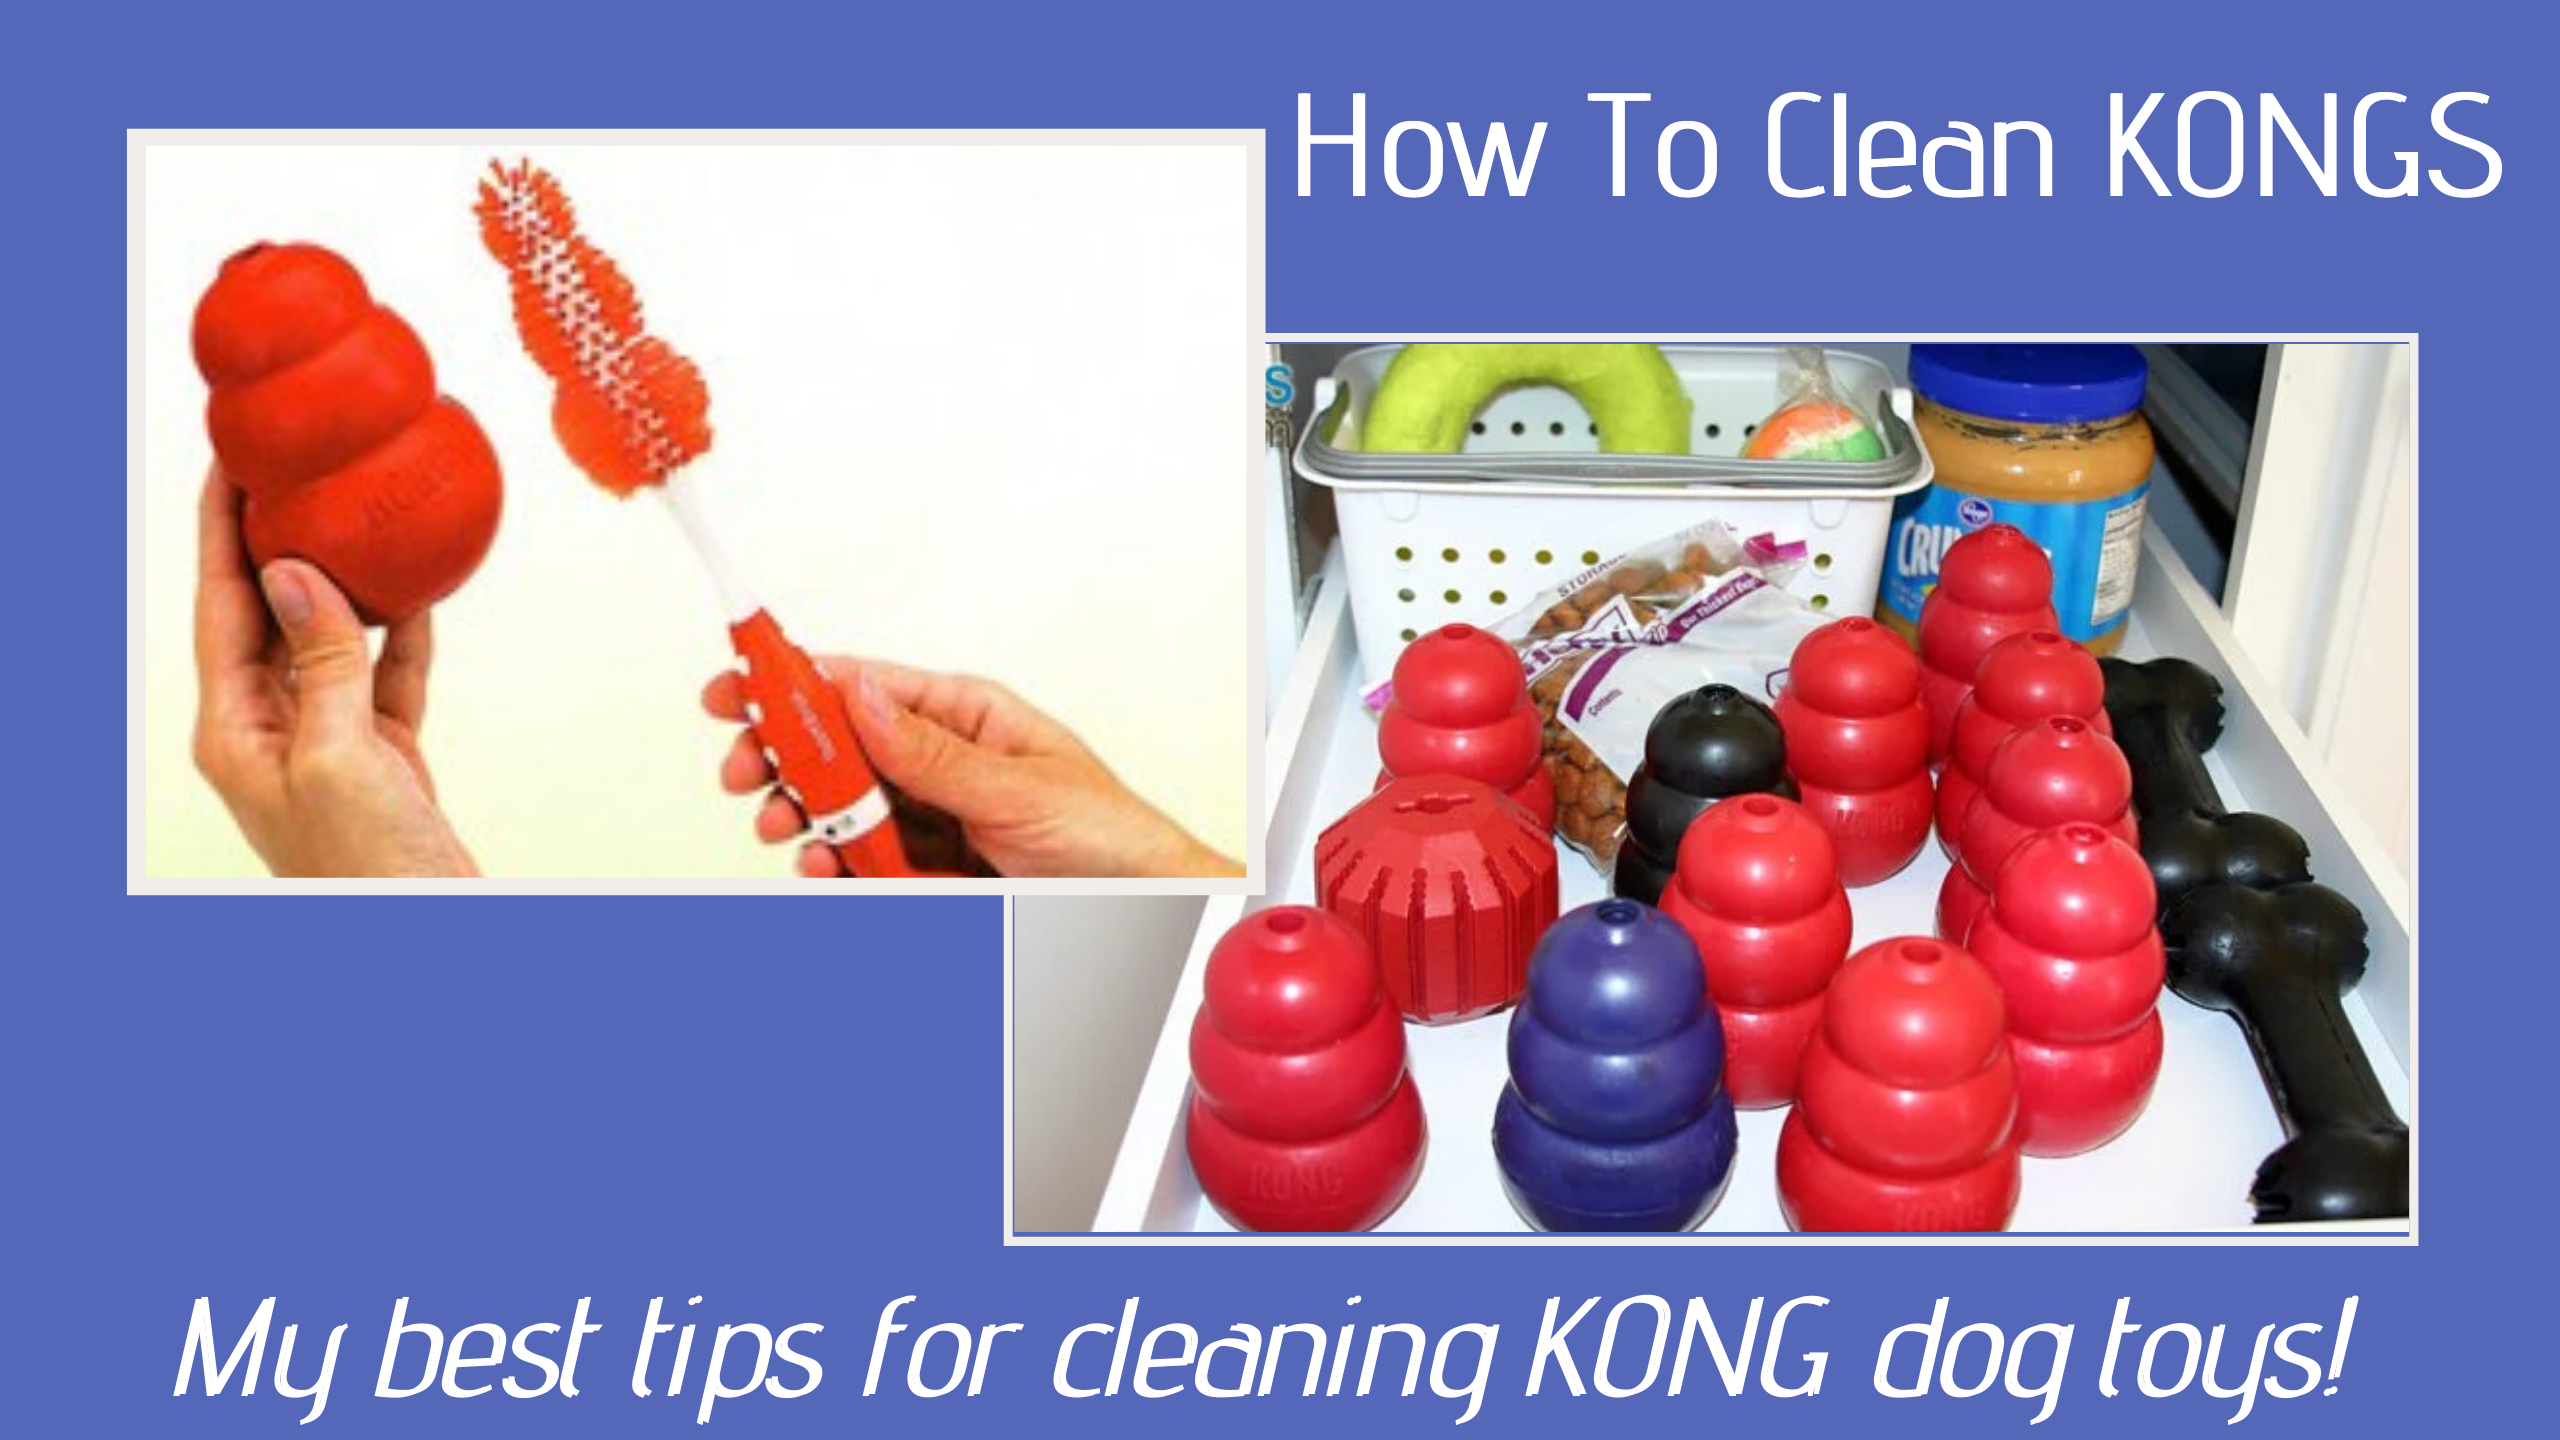 Cleaning Kong Dog Toys - See The Best Way To Clean Kongs | The First Time Dog Owners Guide